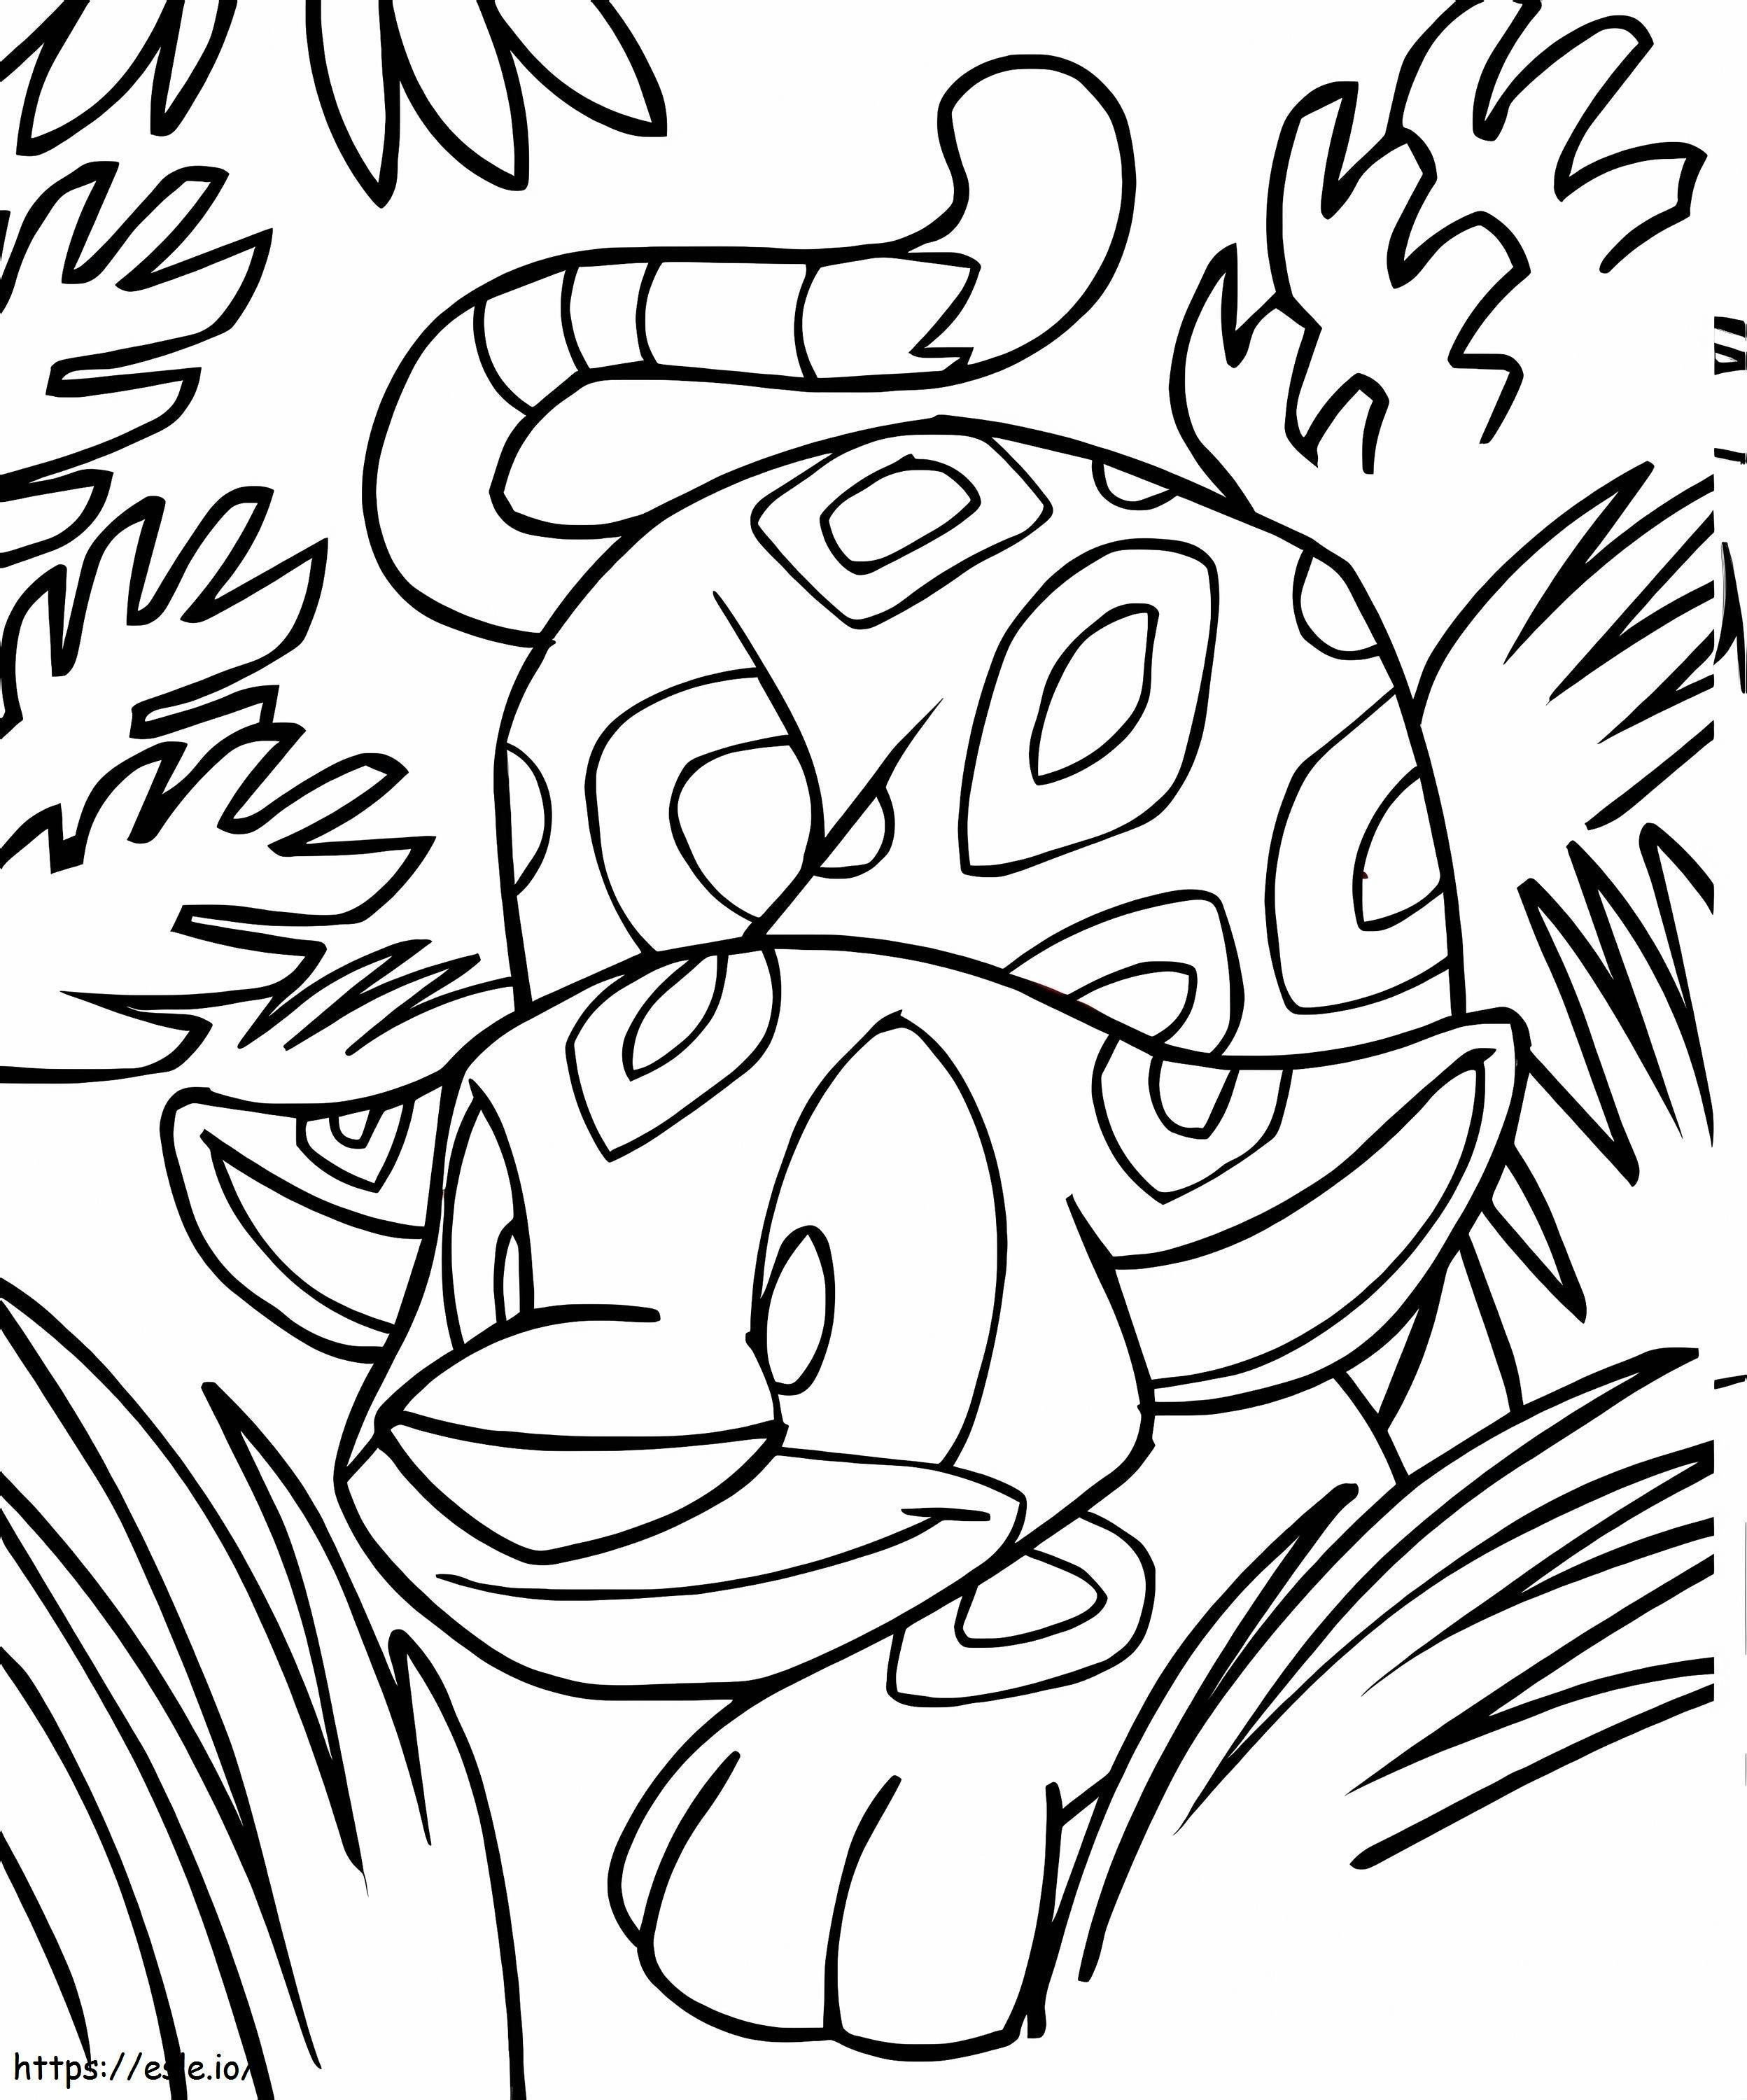 Neopets 4 coloring page